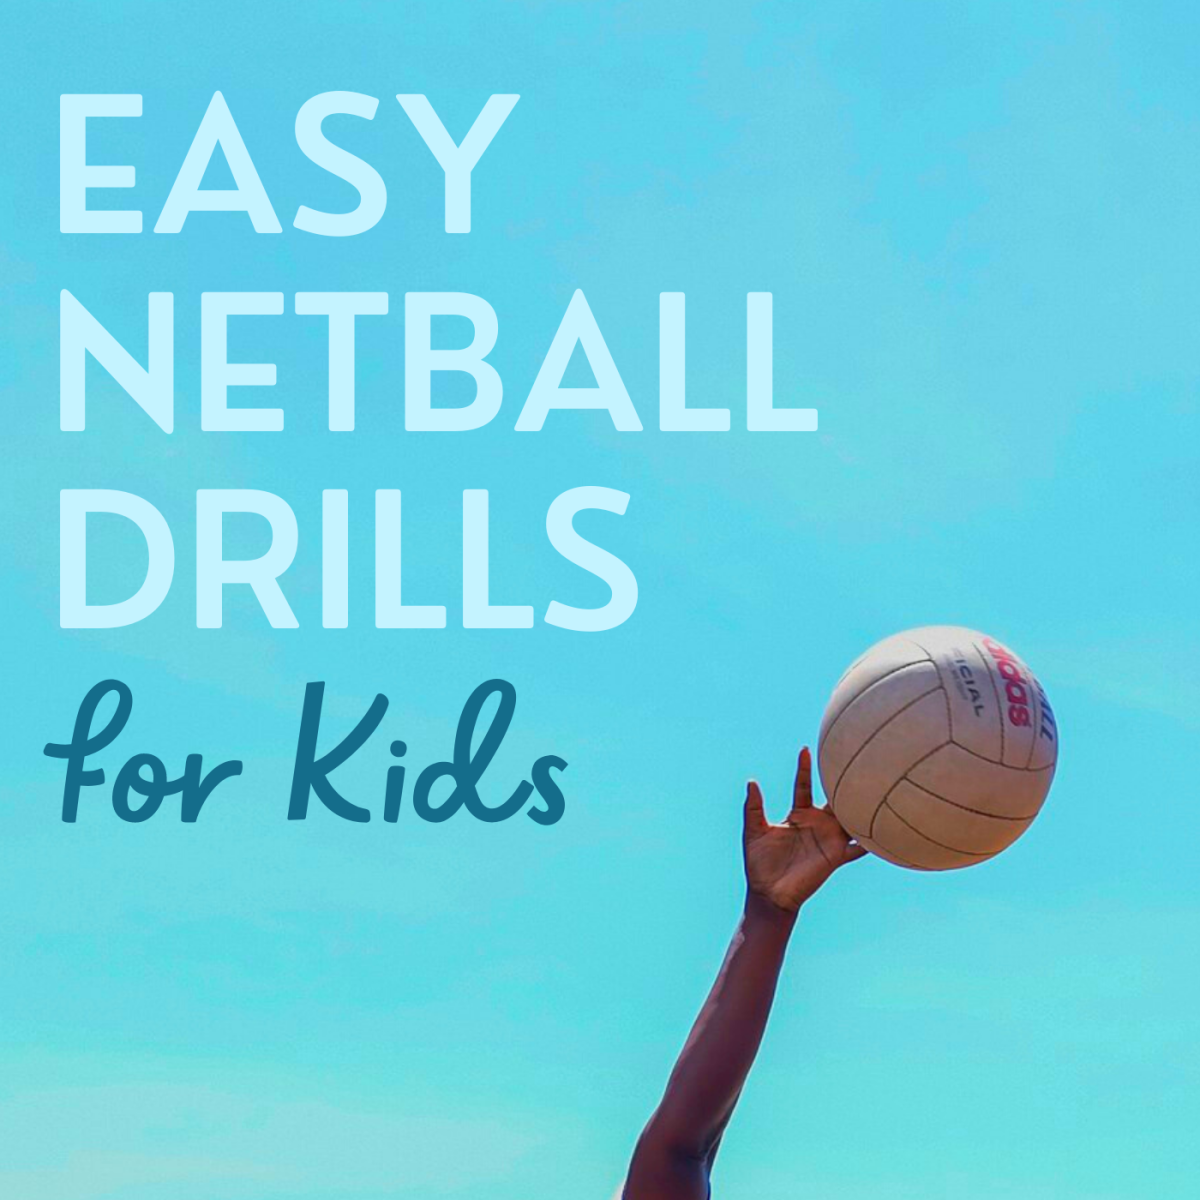 Your team will love playing these fun games, and they'll be developing their skills at the same time!